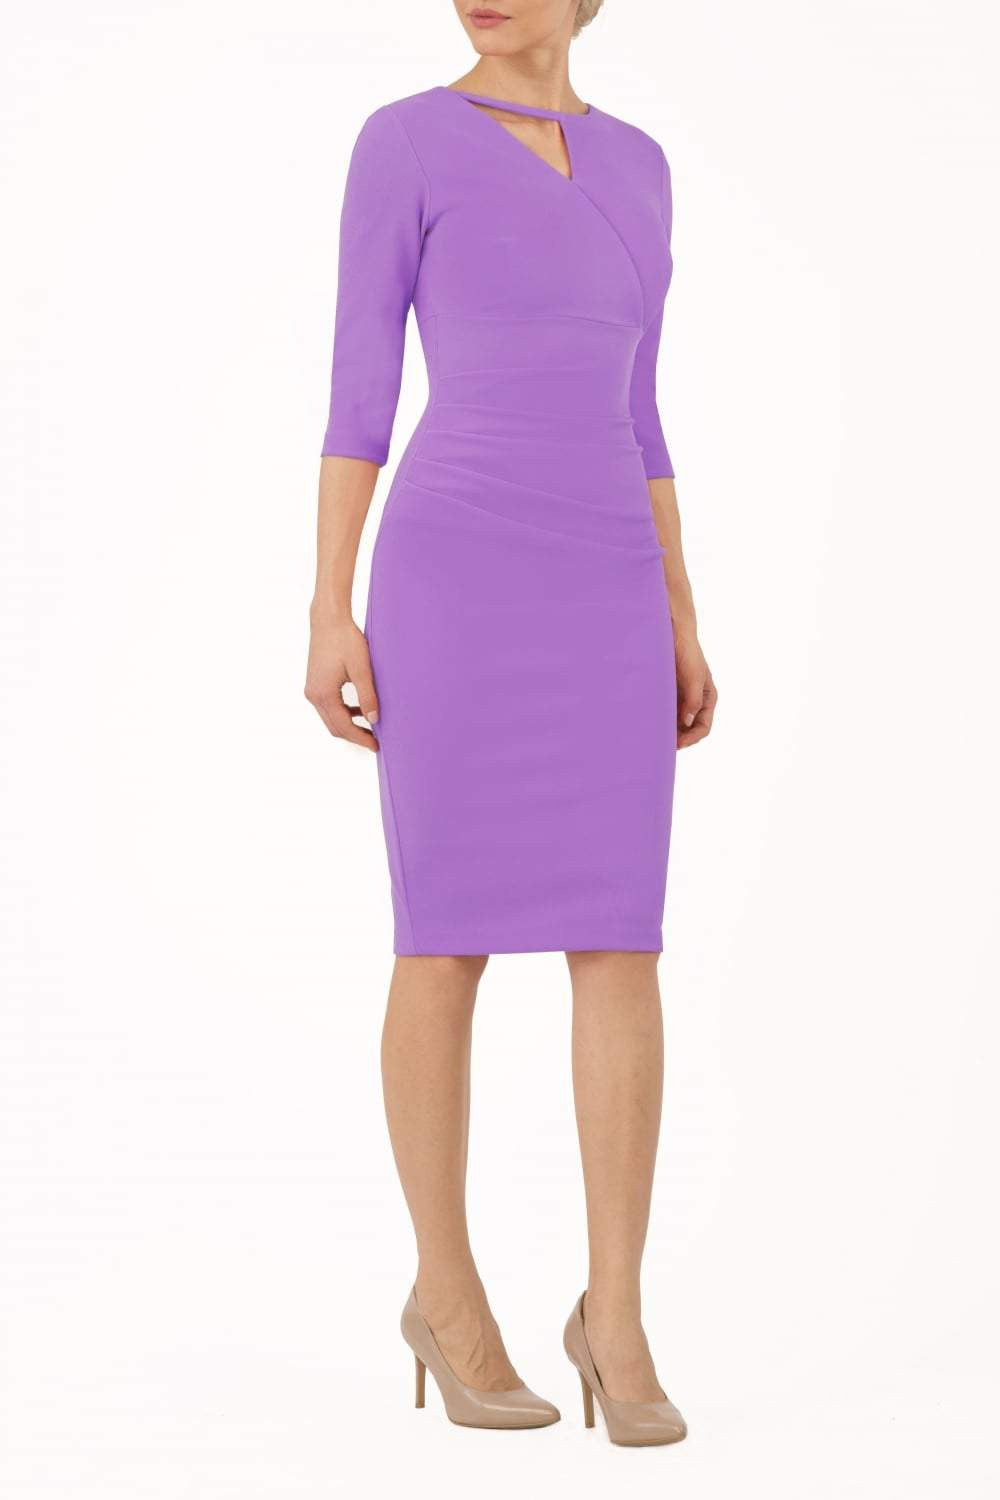 model wearing diva catwalk helston lilac pencil skirt  dress with sleeves and cut out detail on the neckline front